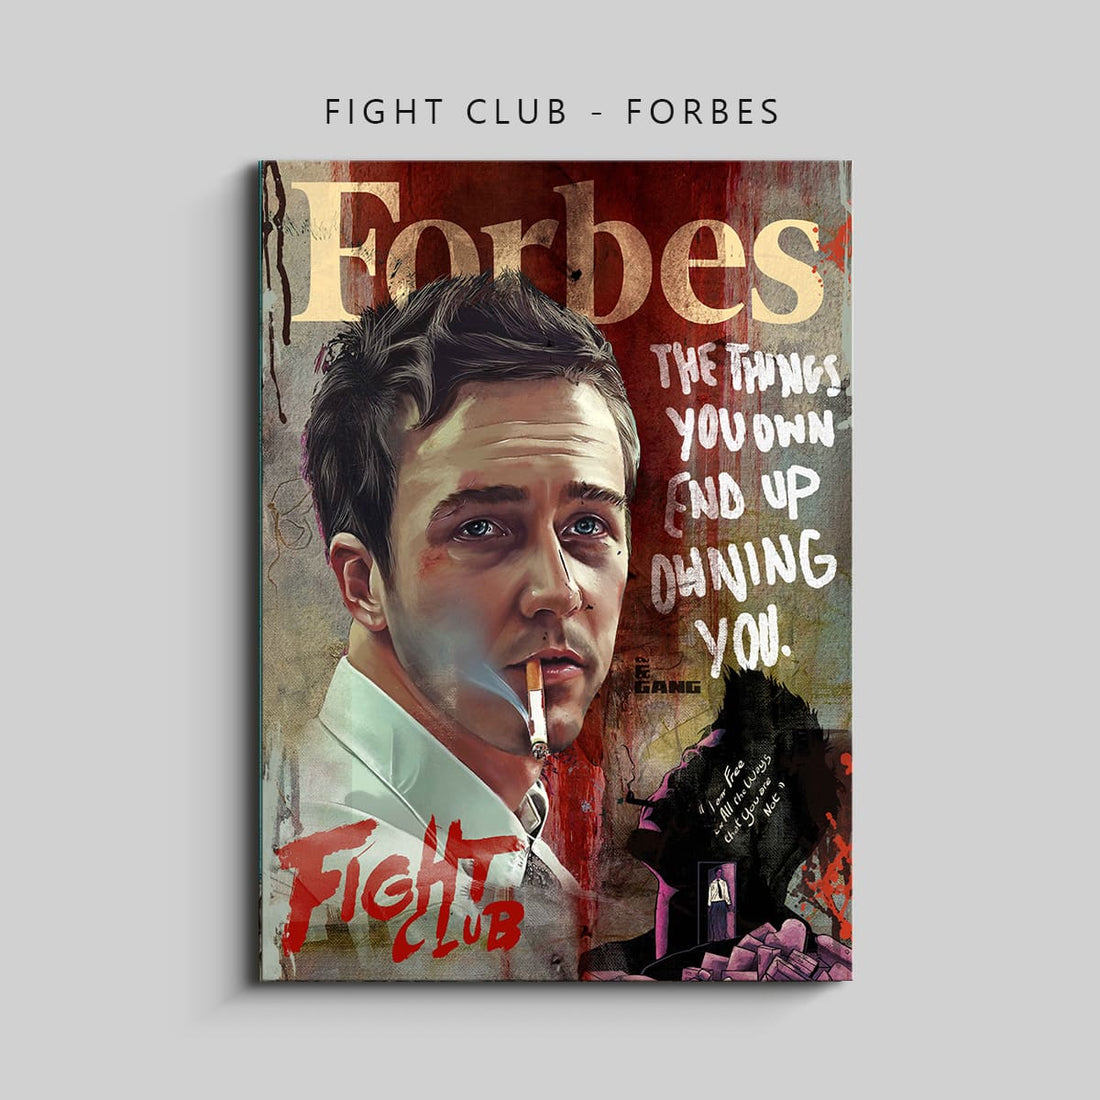 Fight Club - Forbes